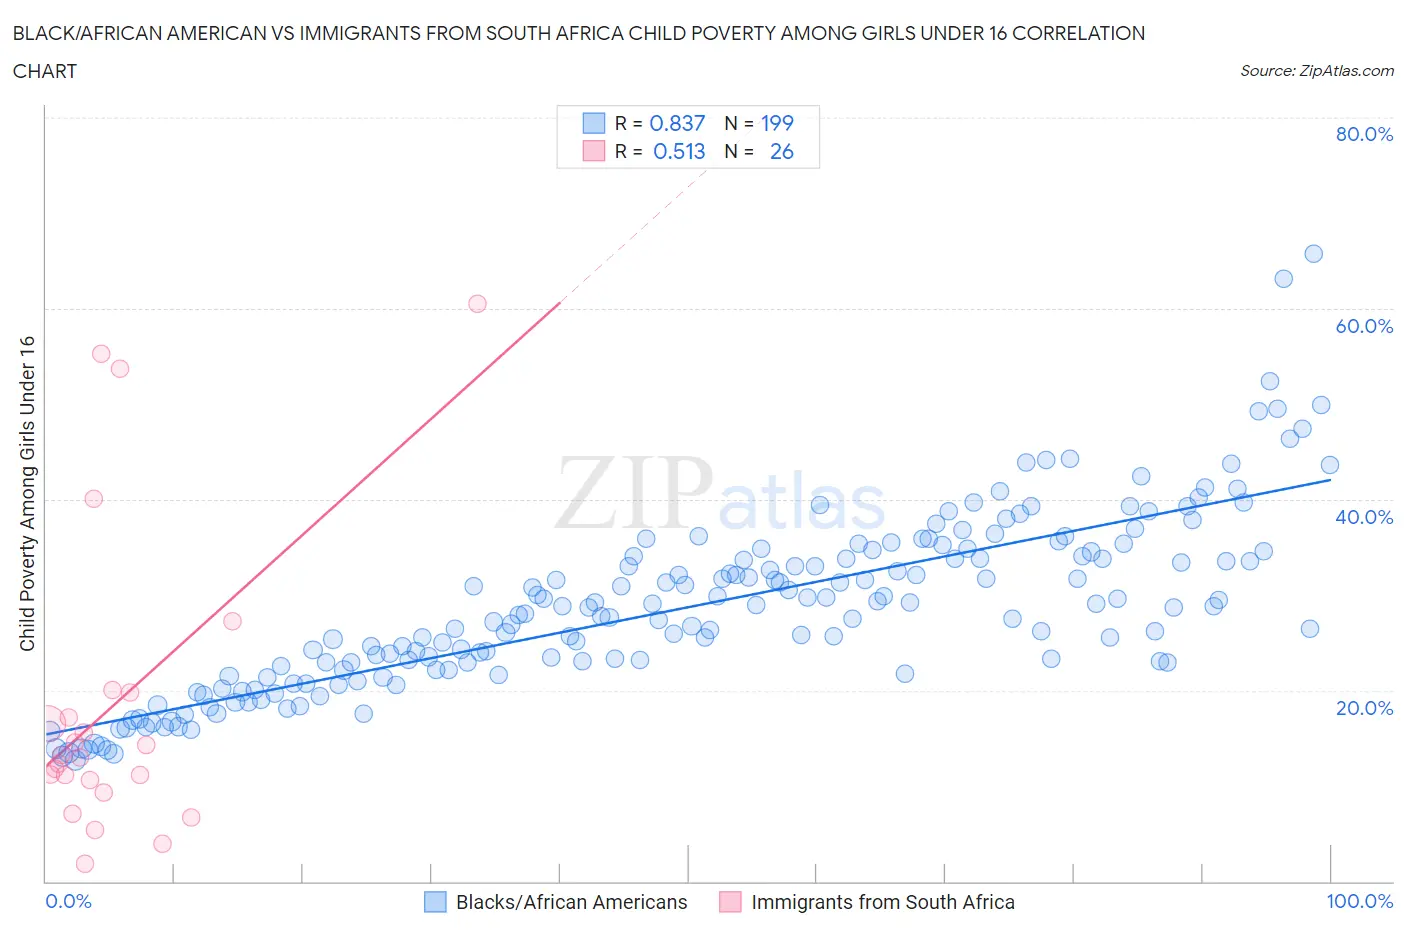 Black/African American vs Immigrants from South Africa Child Poverty Among Girls Under 16